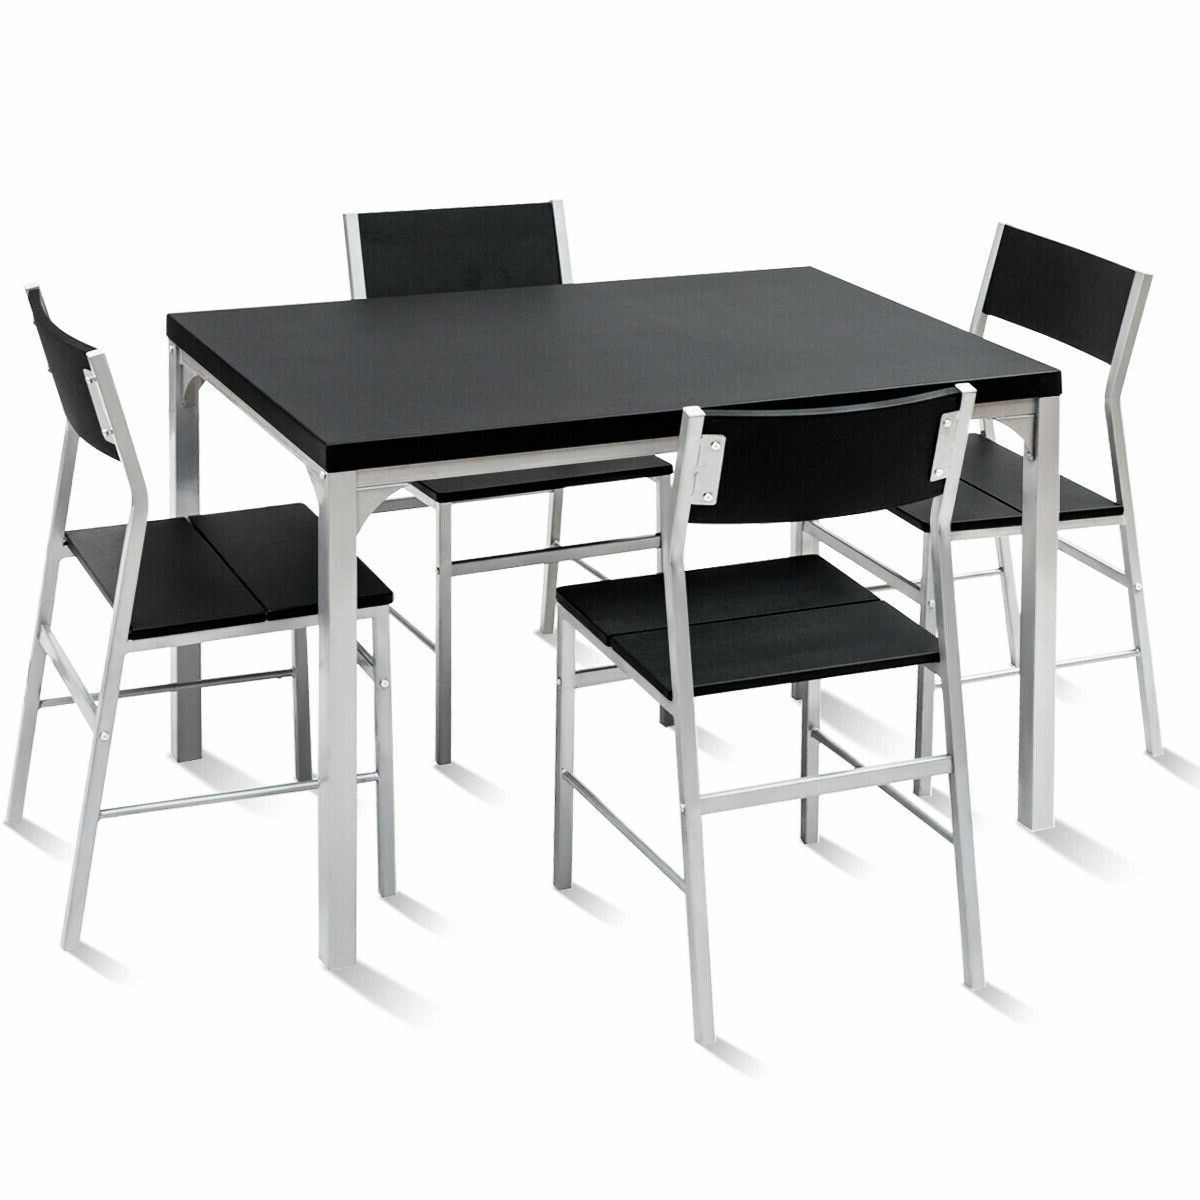 Wayfair Pertaining To Latest Yedinak 5 Piece Solid Wood Dining Sets (View 11 of 25)